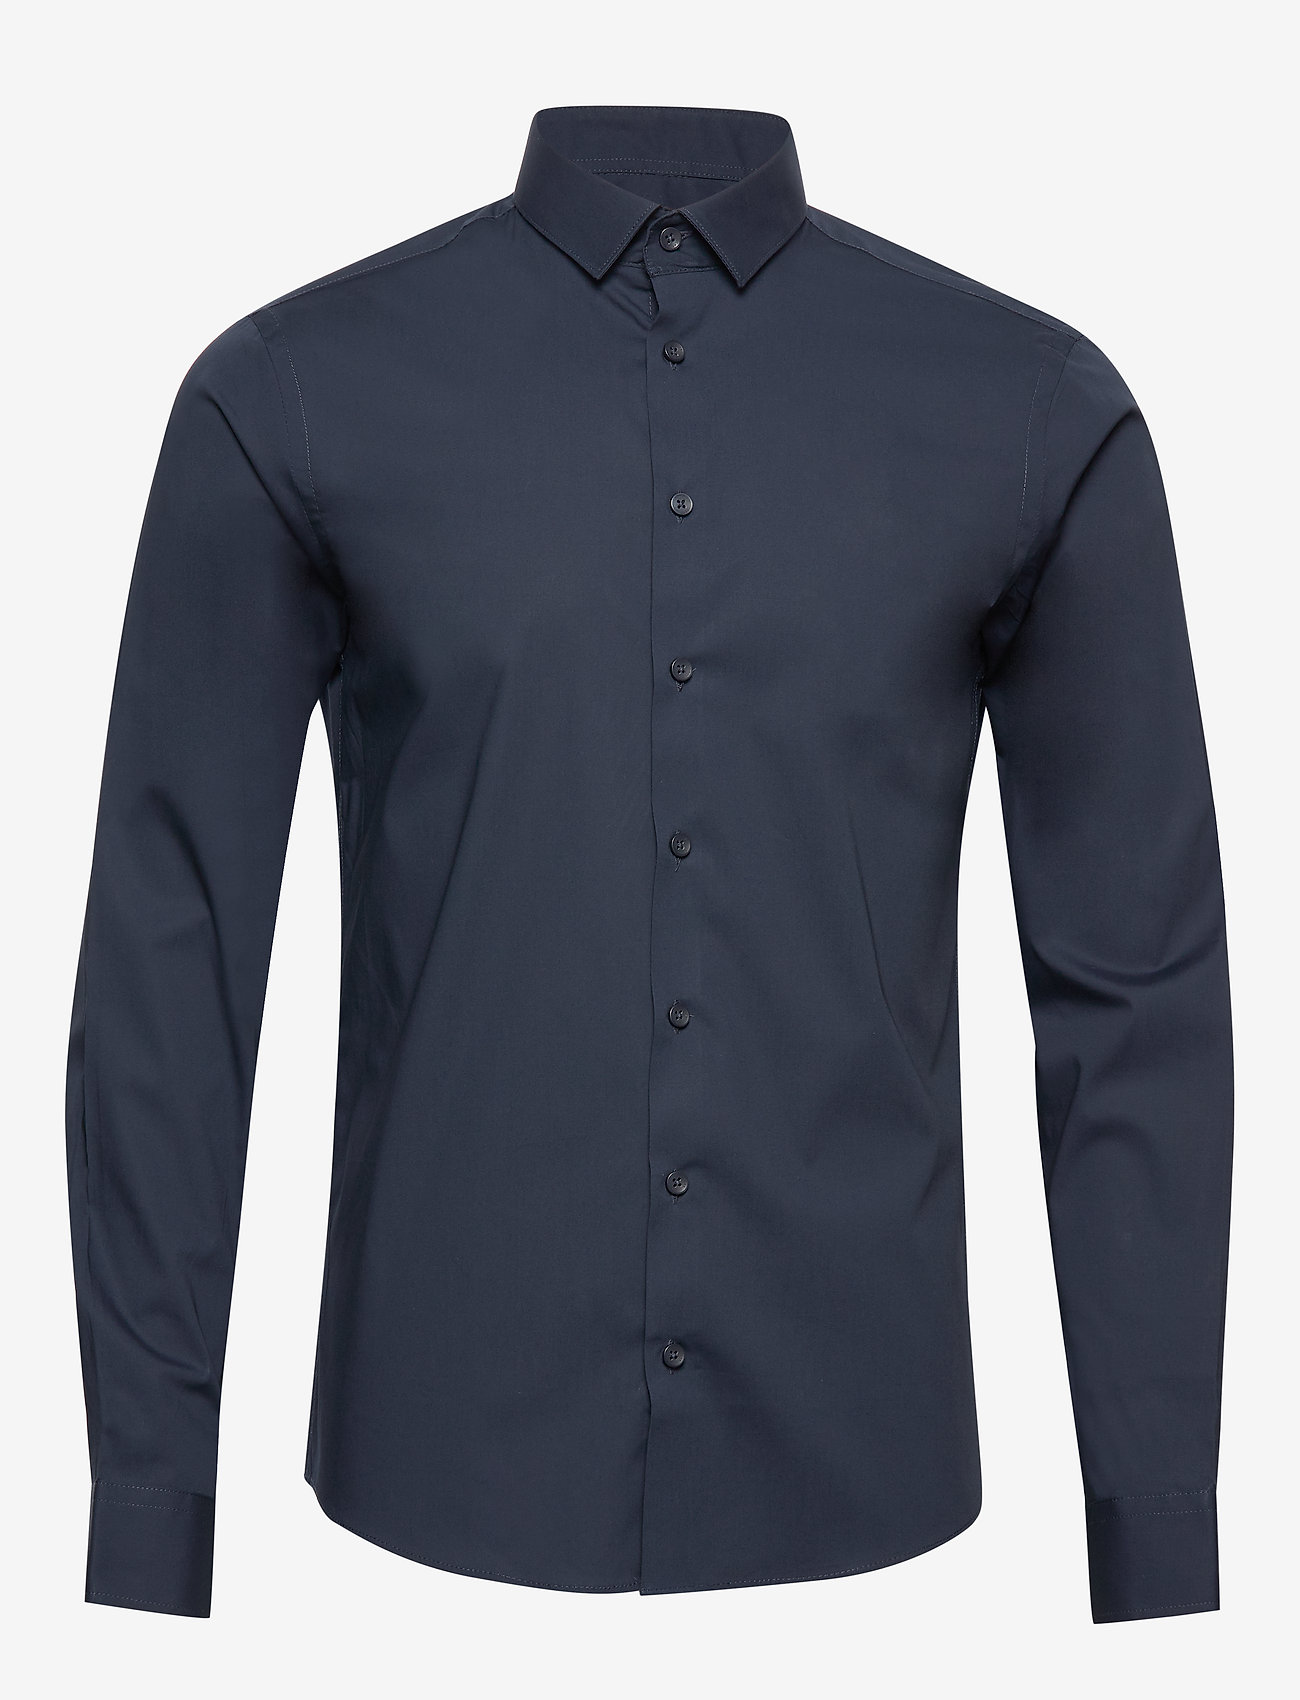 Casual Friday - CFPALLE Slim Fit Shirt - lowest prices - navy - 0